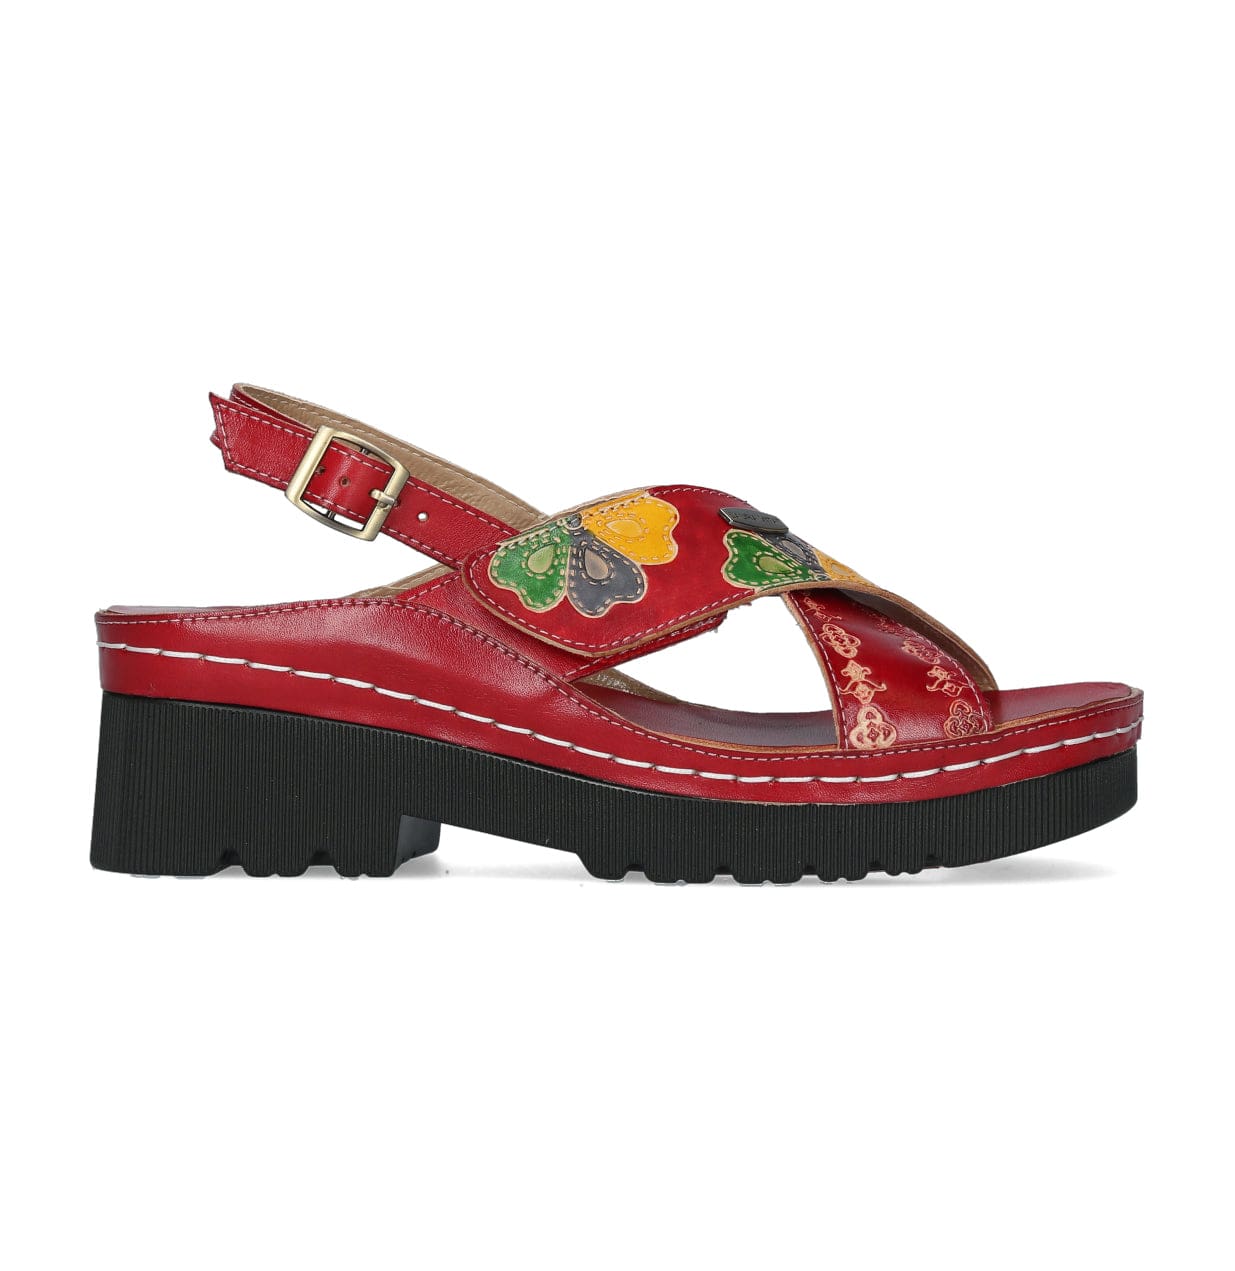 Chaussures LEXIAO 06 - 35 / Rouge - Sandale